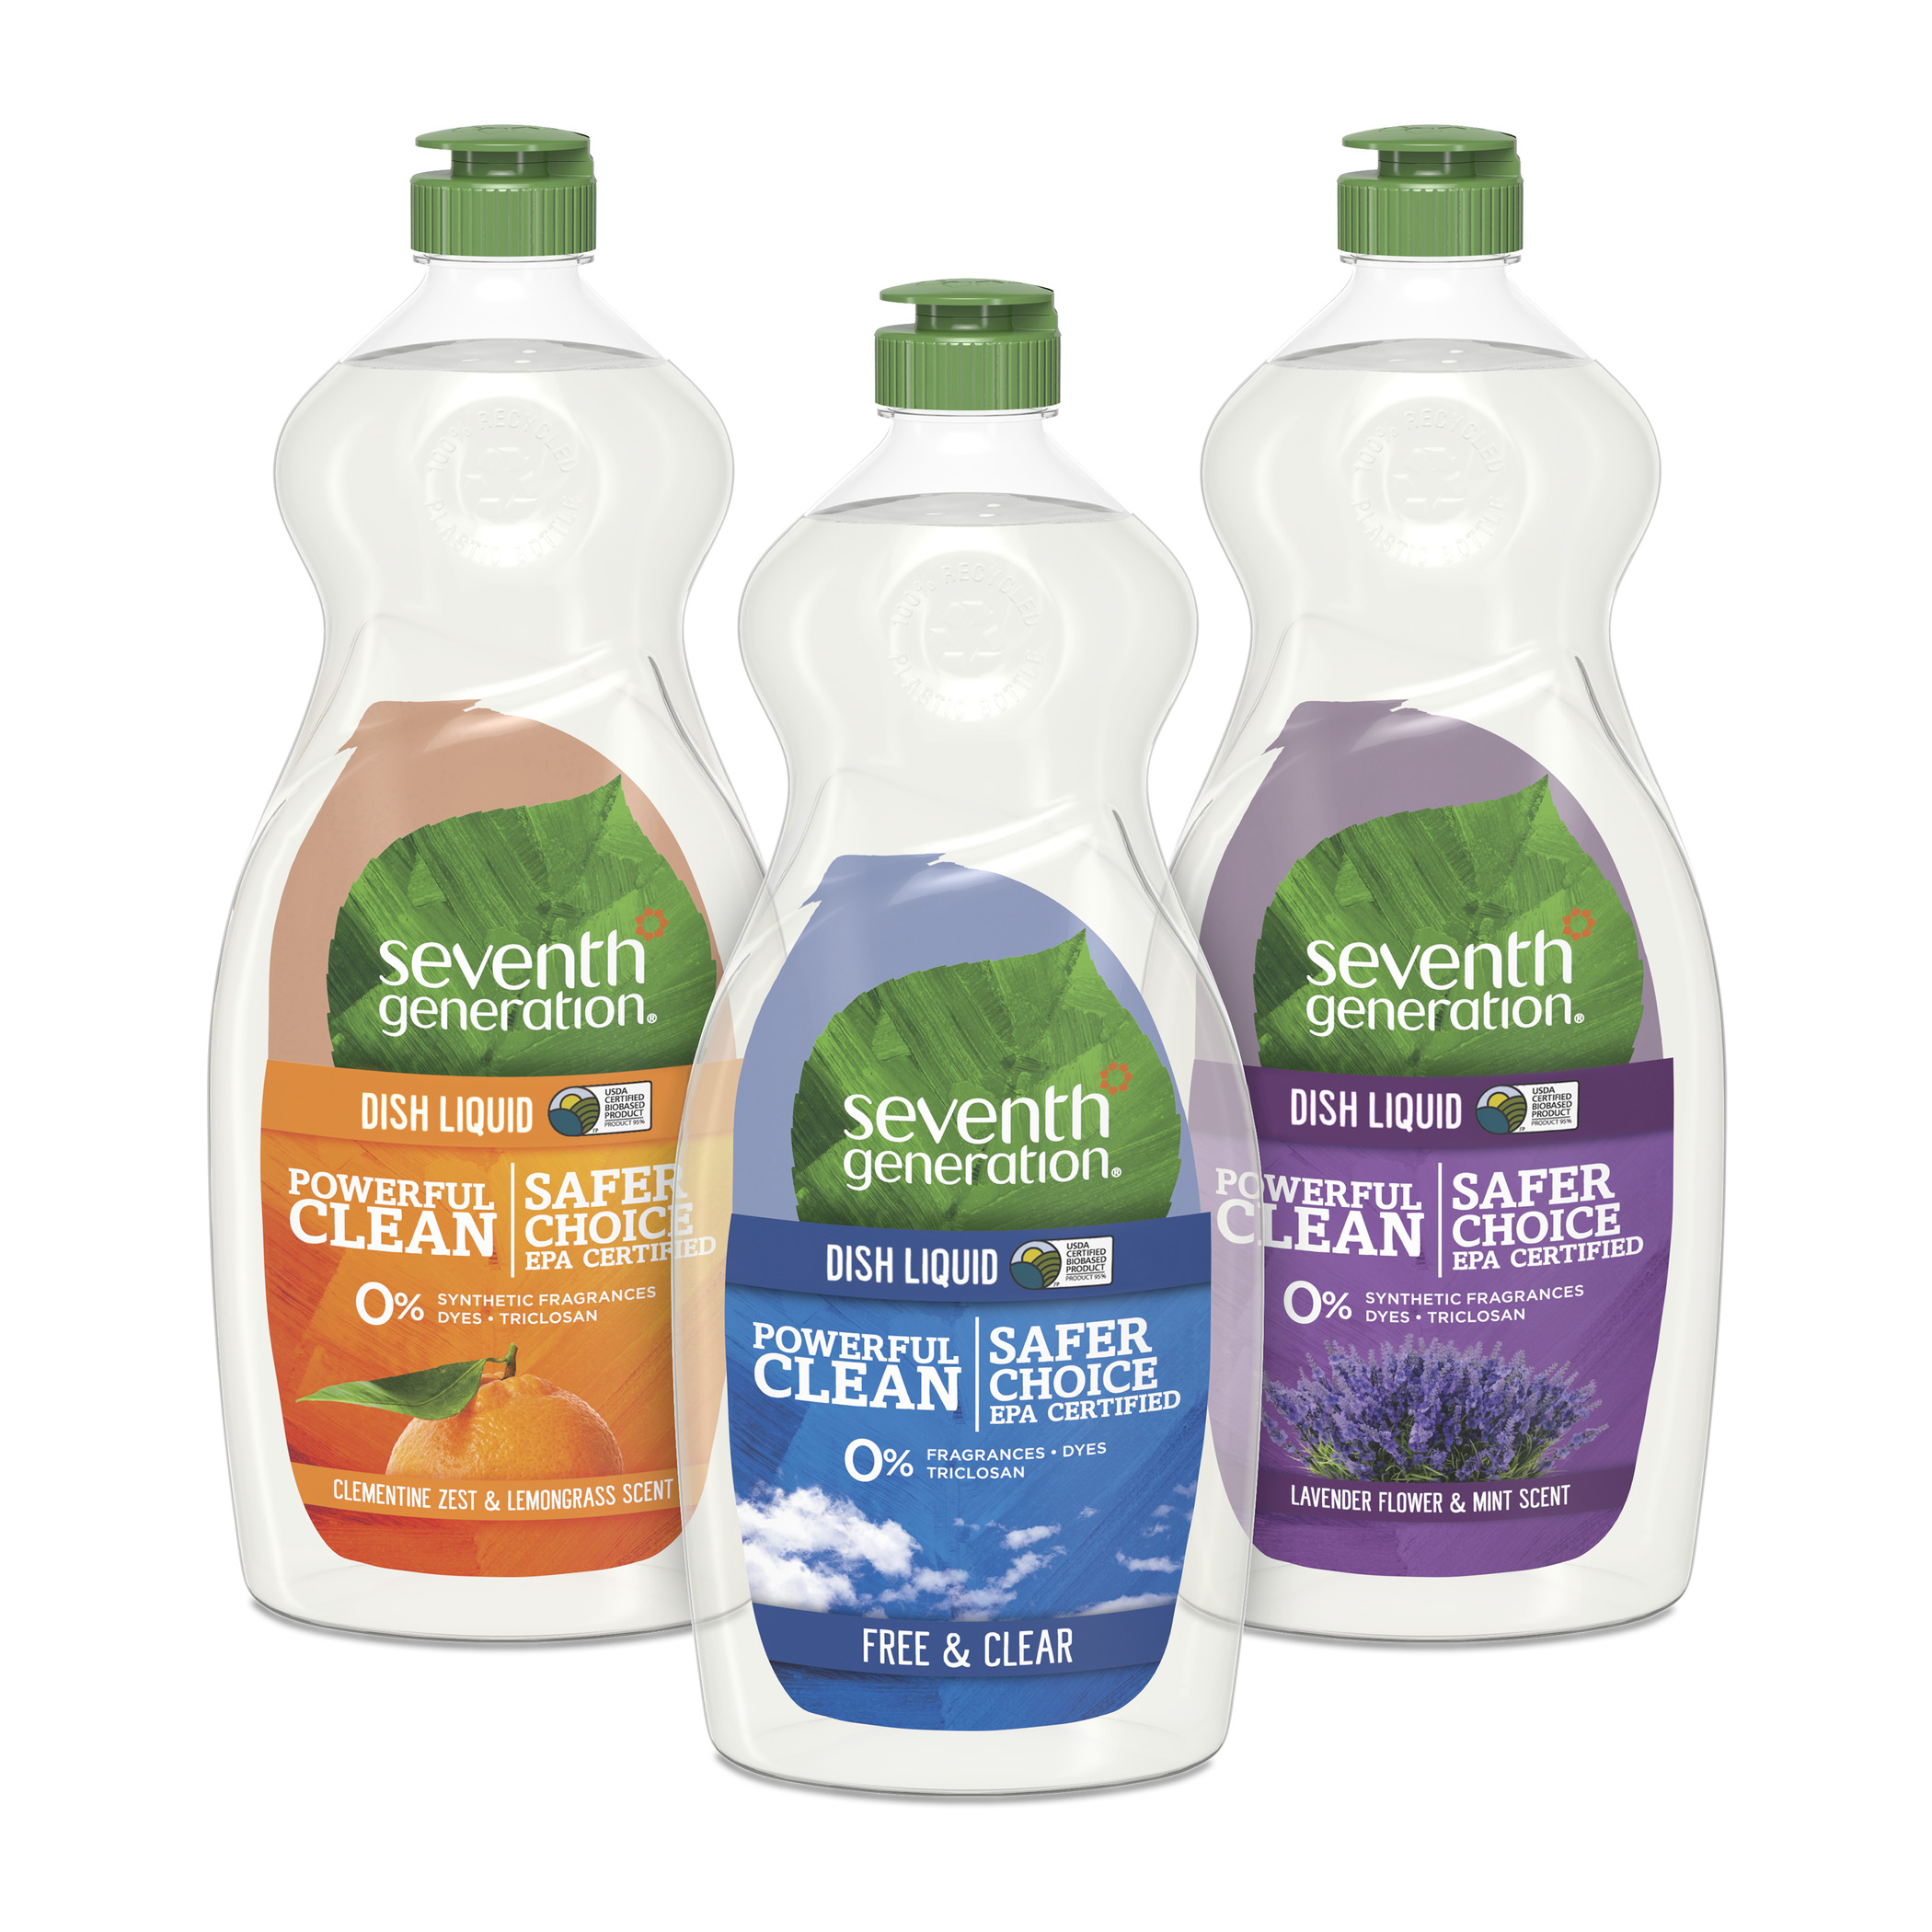 Seventh Generation's Natural Dish Liquid & Sustainable Packaging